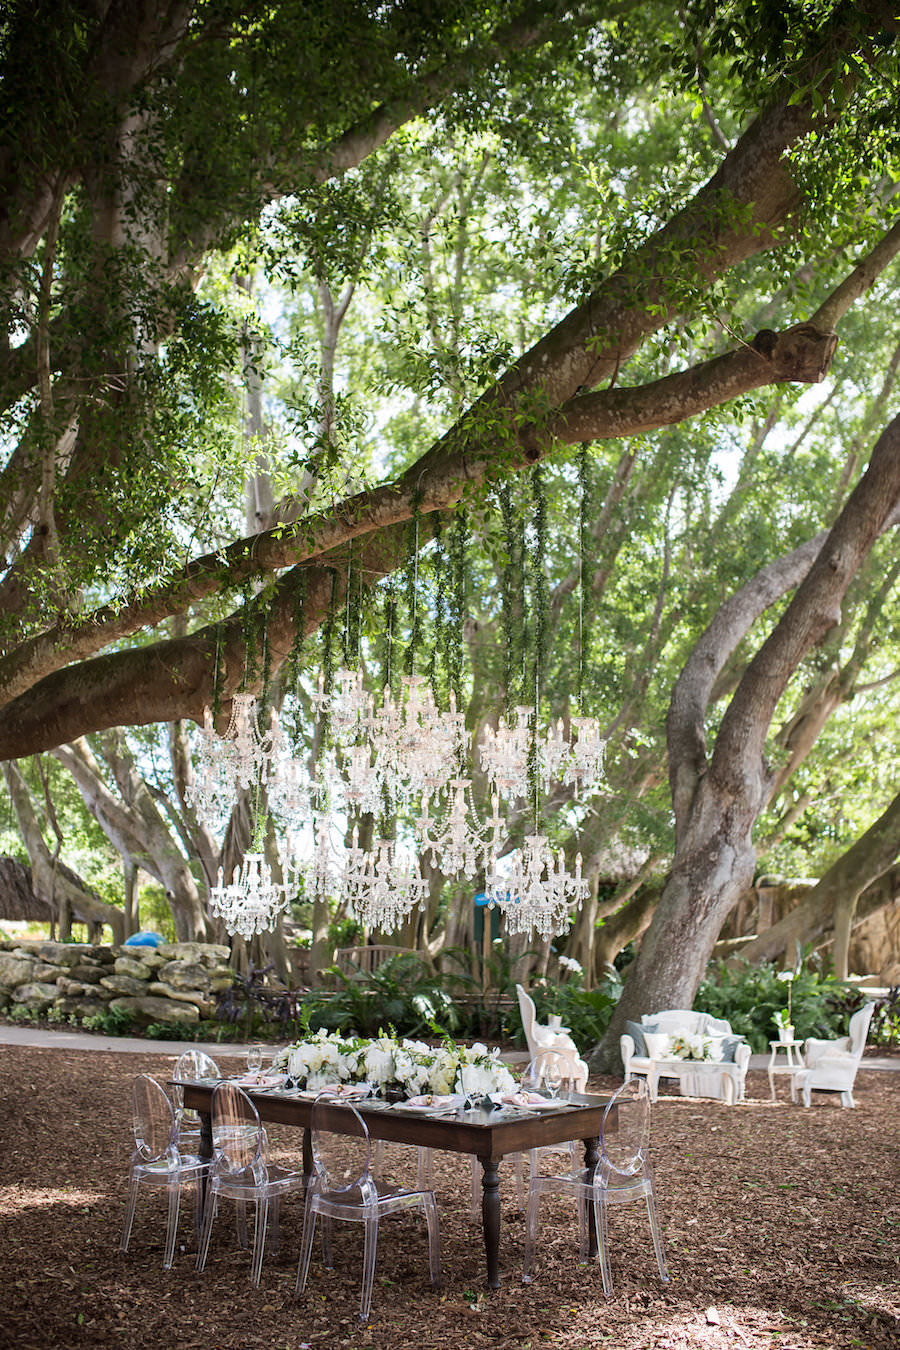 Elegant Garden Party Outdoor Wedding Reception with Chandelier Canopy, Ghost Chairs, Farm Chairs and White Floral Centerpieces | Luxury Sarasota Wedding Venue Marie Selby Gardens | Wedding Planner NK Productions